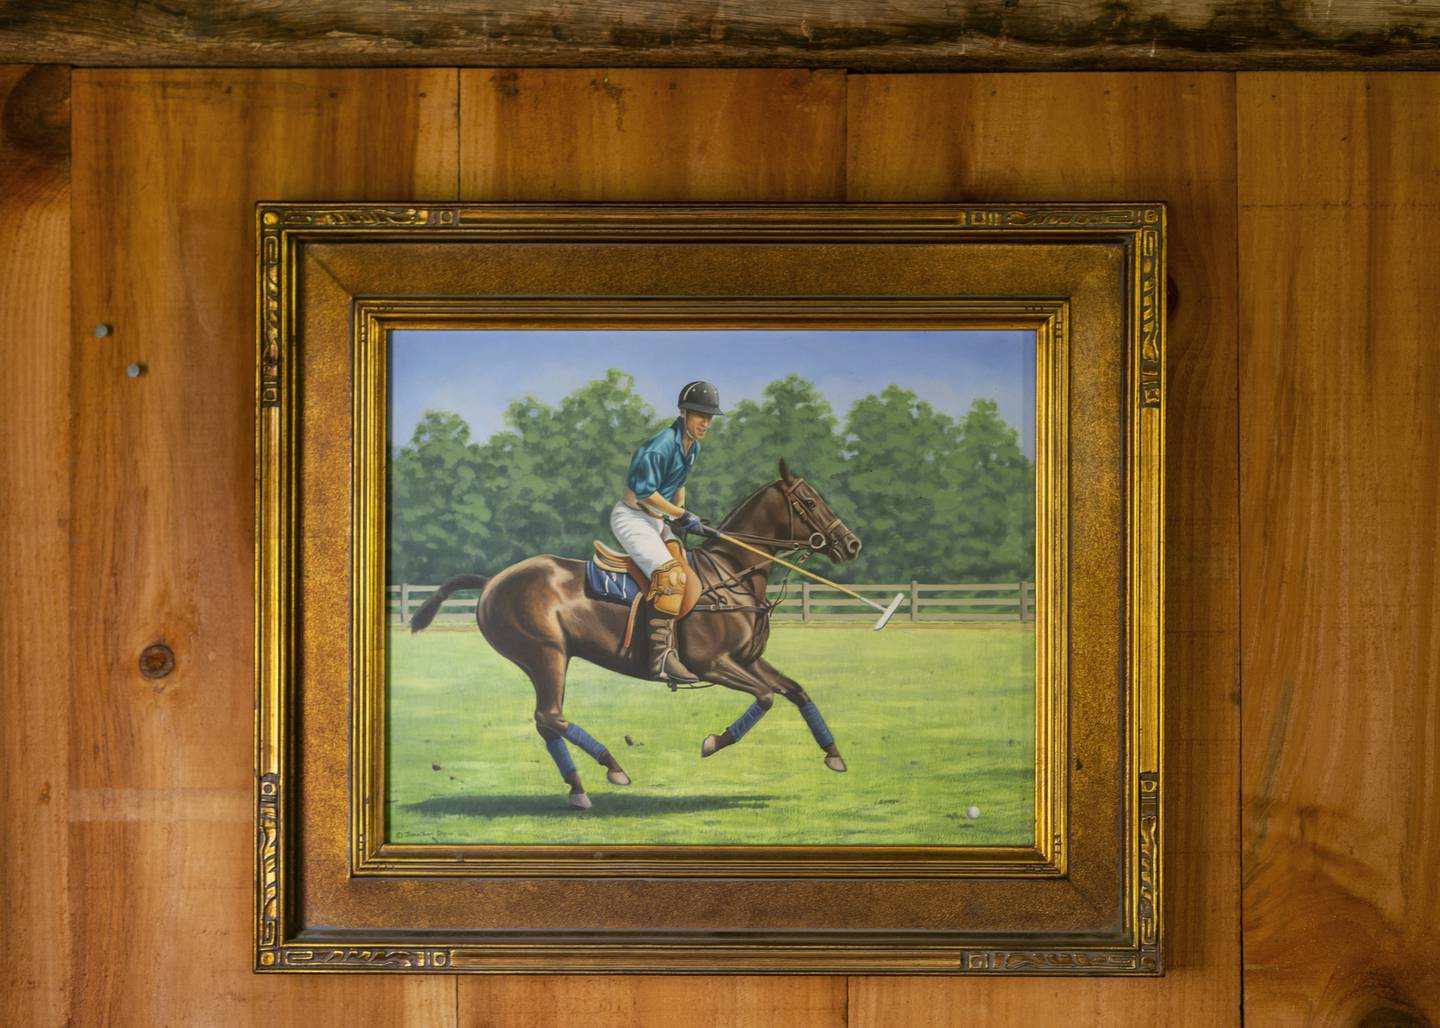 A painting by Jon shaw of a friend on one of his polo ponies at Mashomac Polo Club, New York hangs on the wall of a converted store house at the Emory Farm on August 4th, 2022 in Queenstown Maryland